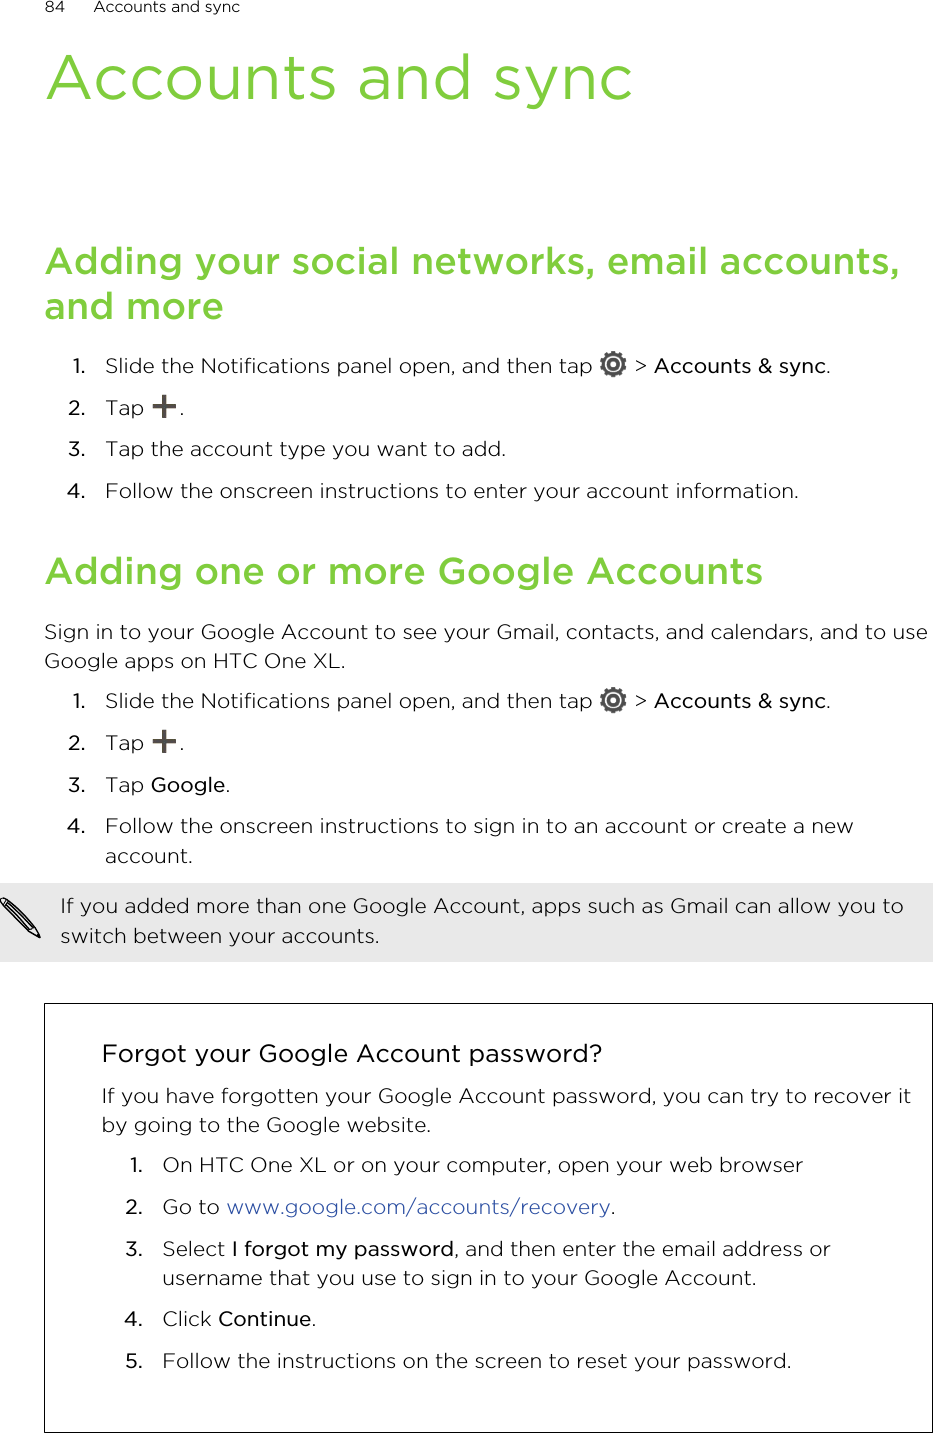 Accounts and syncAdding your social networks, email accounts,and more1. Slide the Notifications panel open, and then tap   &gt; Accounts &amp; sync.2. Tap  .3. Tap the account type you want to add.4. Follow the onscreen instructions to enter your account information.Adding one or more Google AccountsSign in to your Google Account to see your Gmail, contacts, and calendars, and to useGoogle apps on HTC One XL.1. Slide the Notifications panel open, and then tap   &gt; Accounts &amp; sync.2. Tap  .3. Tap Google.4. Follow the onscreen instructions to sign in to an account or create a newaccount.If you added more than one Google Account, apps such as Gmail can allow you toswitch between your accounts.Forgot your Google Account password?If you have forgotten your Google Account password, you can try to recover itby going to the Google website.1. On HTC One XL or on your computer, open your web browser2. Go to www.google.com/accounts/recovery.3. Select I forgot my password, and then enter the email address orusername that you use to sign in to your Google Account.4. Click Continue.5. Follow the instructions on the screen to reset your password.84 Accounts and sync